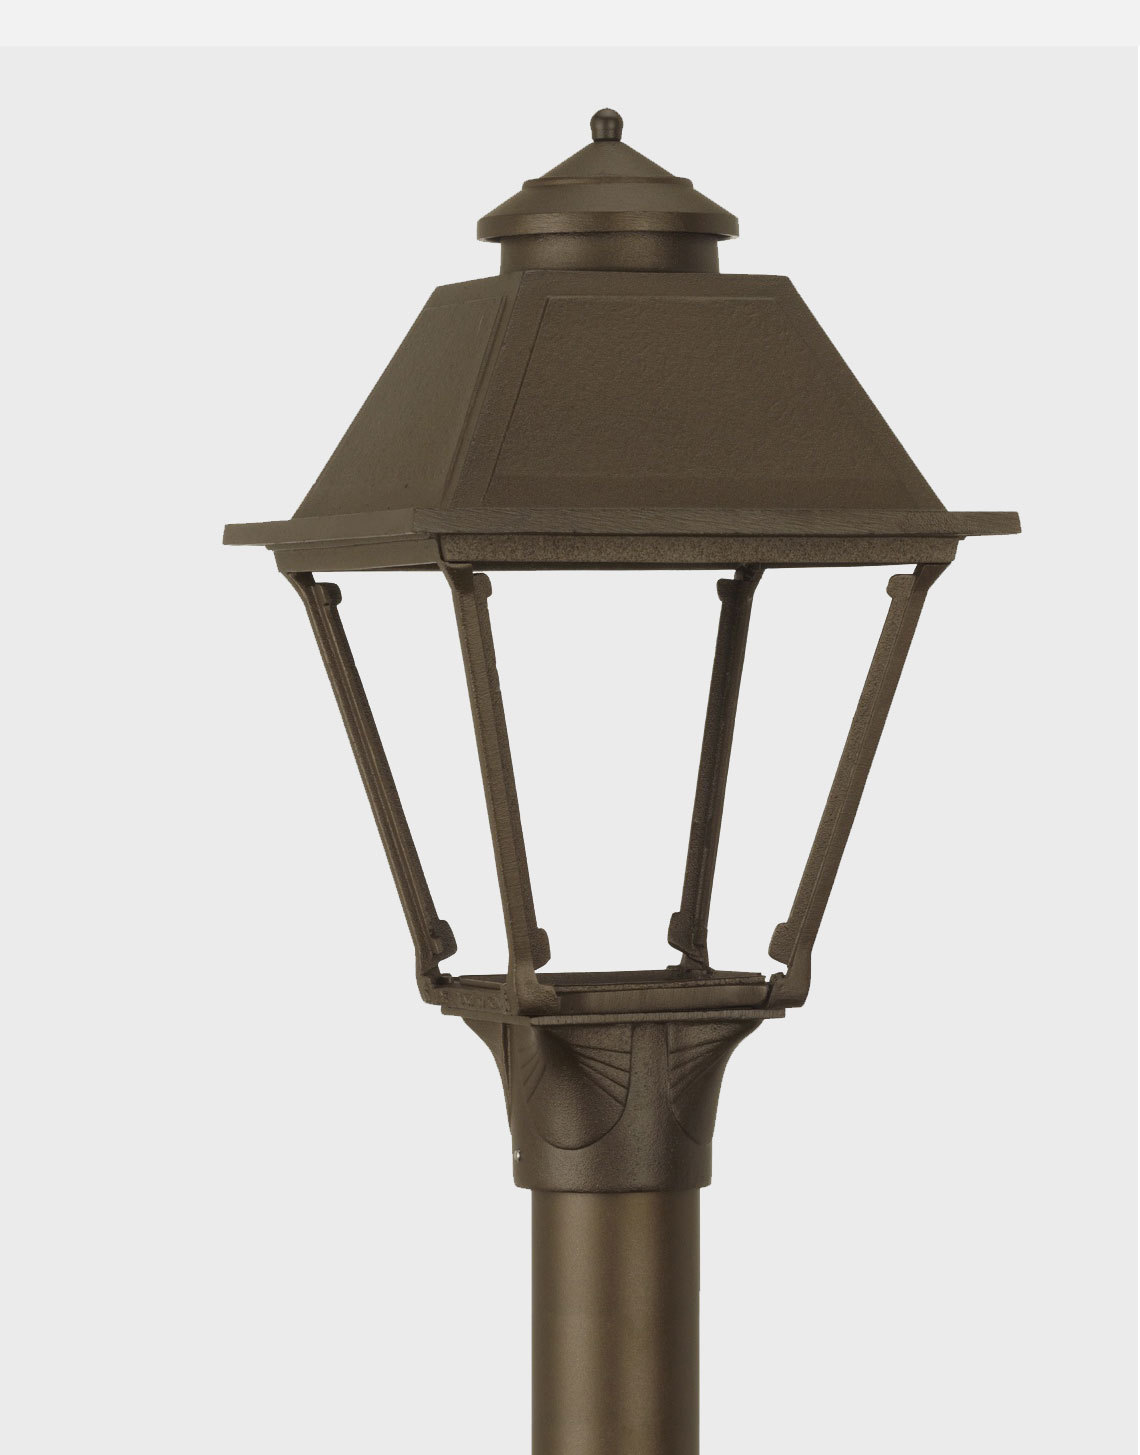 Residential lamps